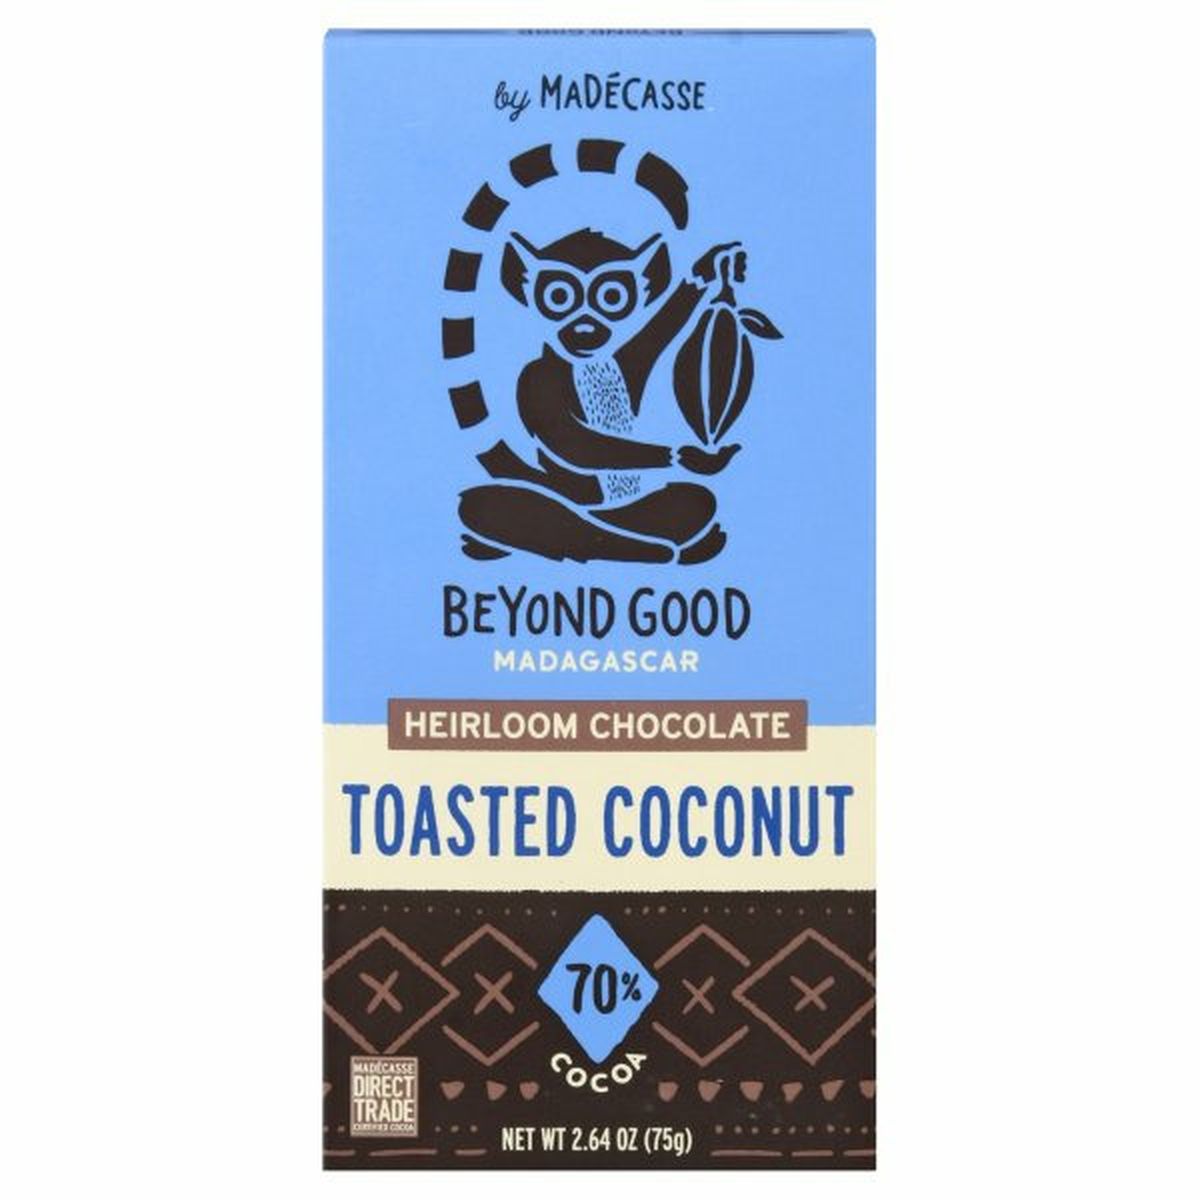 Calories in Beyond Good Chocolate, Heirloom, Toasted Coconut, Madagascar, 70% Cocoa